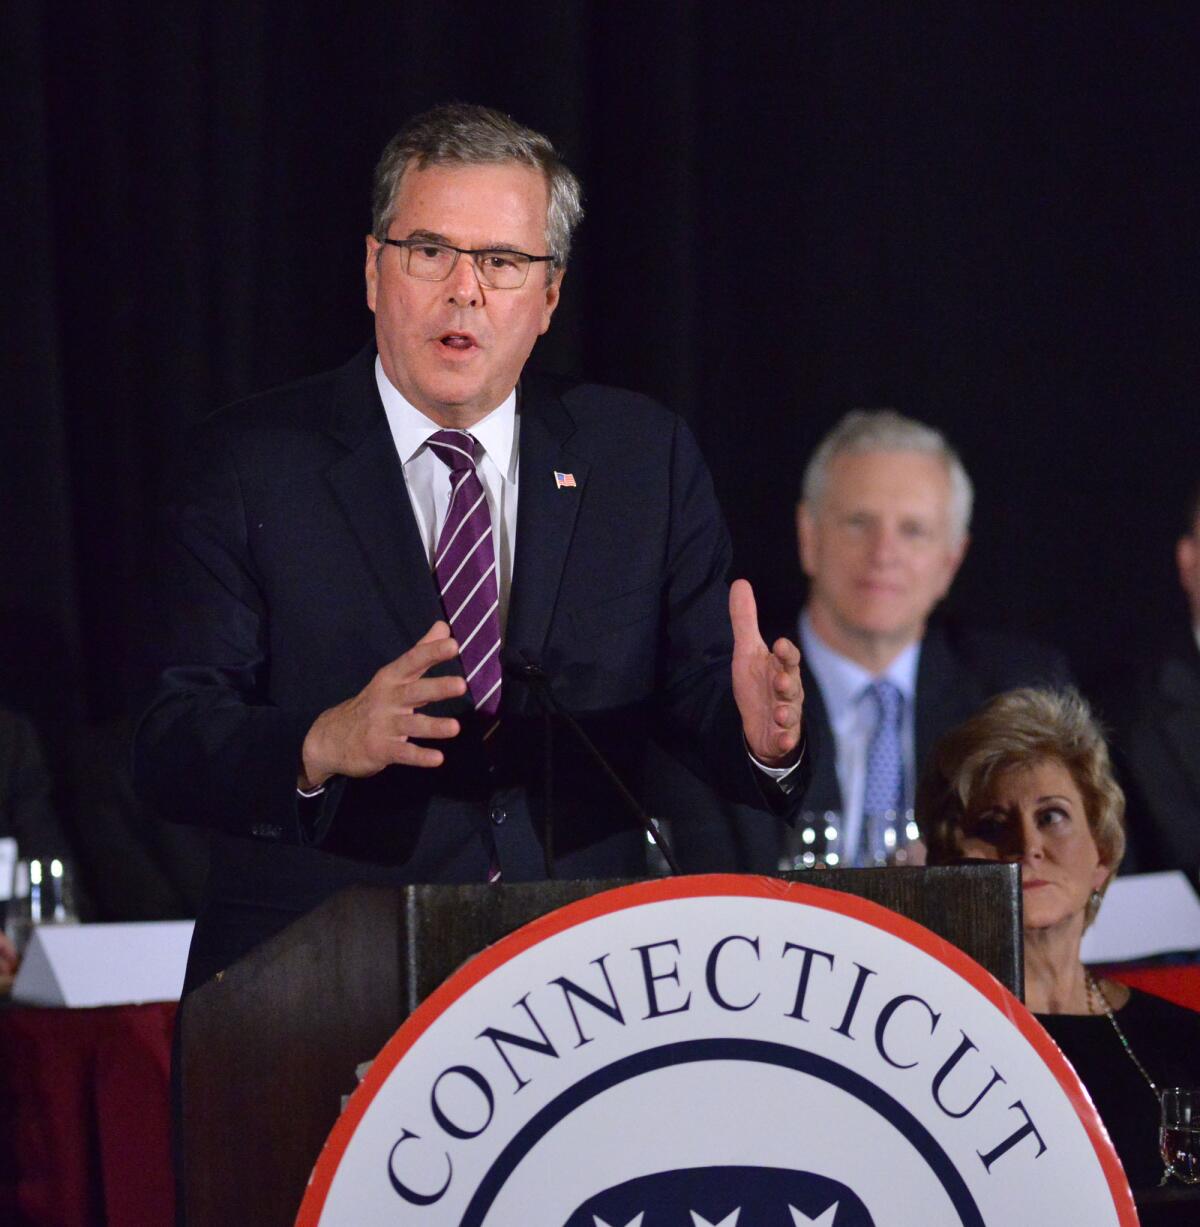 Former Governor of Florida, Jeb Bush, speaks during the 36th annual Prescott Bush Awards Dinner at the Stamford Hilton in Conn.